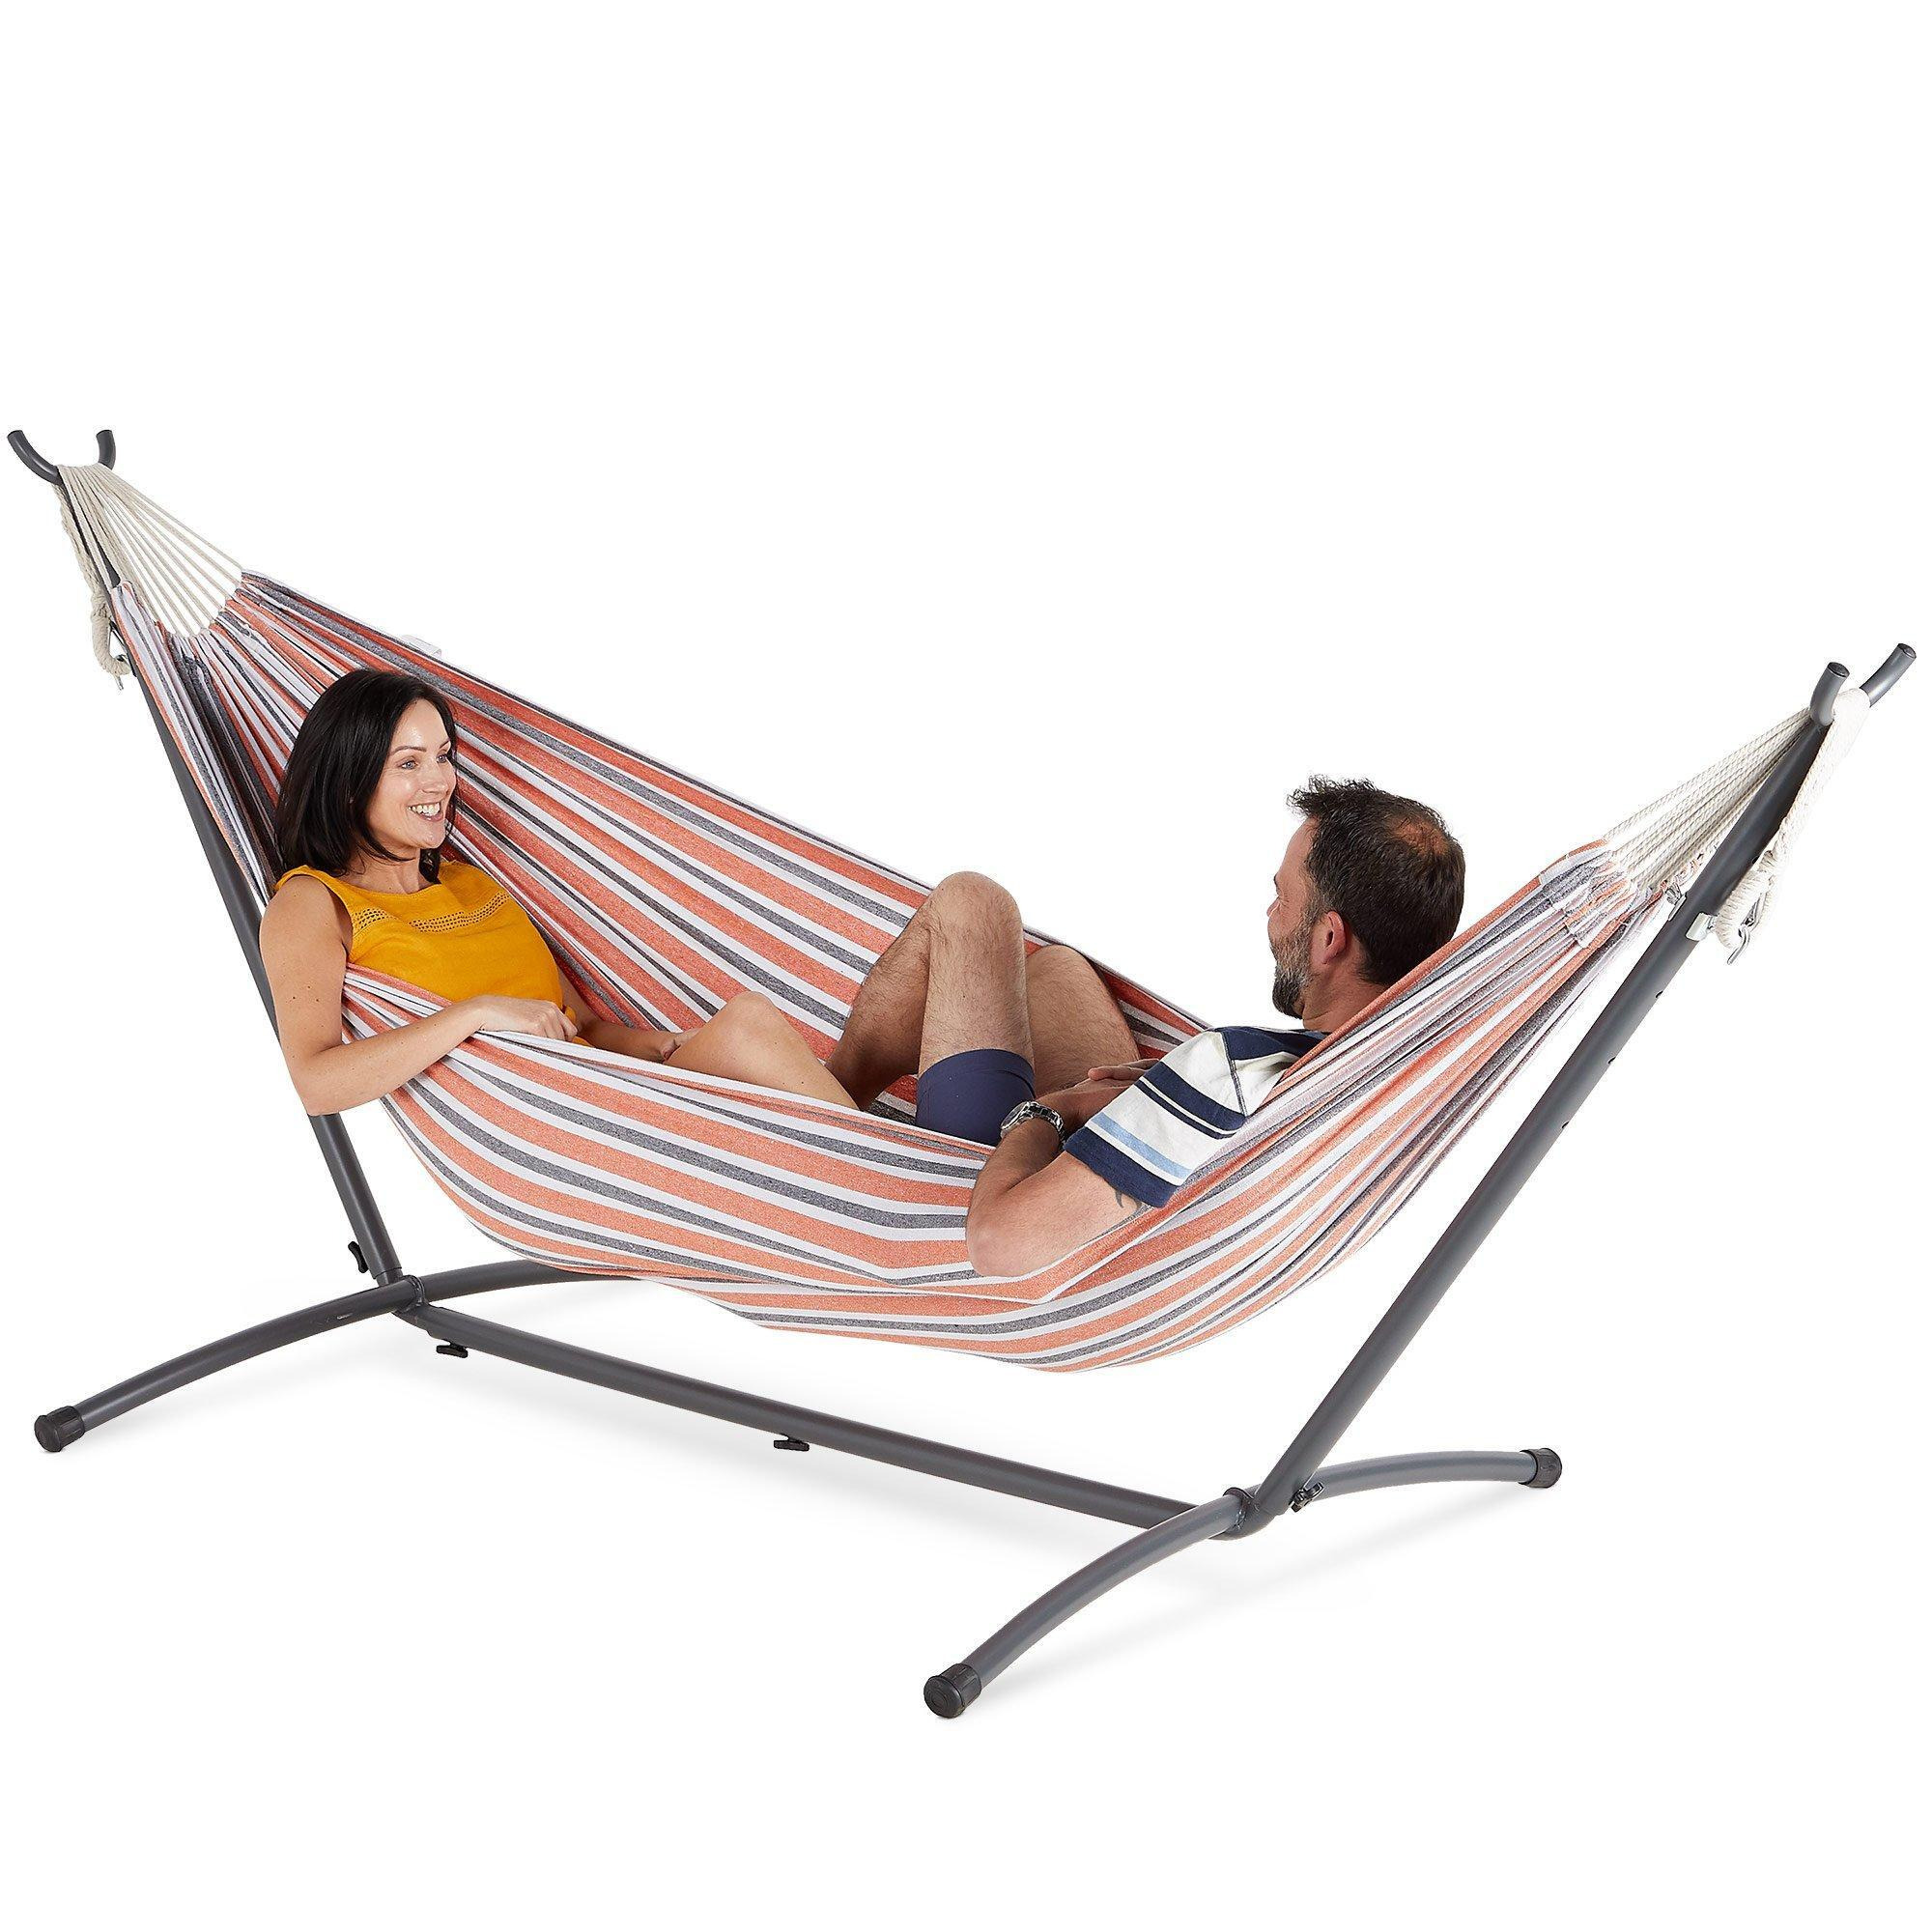 2 Person Striped Freestanding Garden Hammock with Frame - image 1